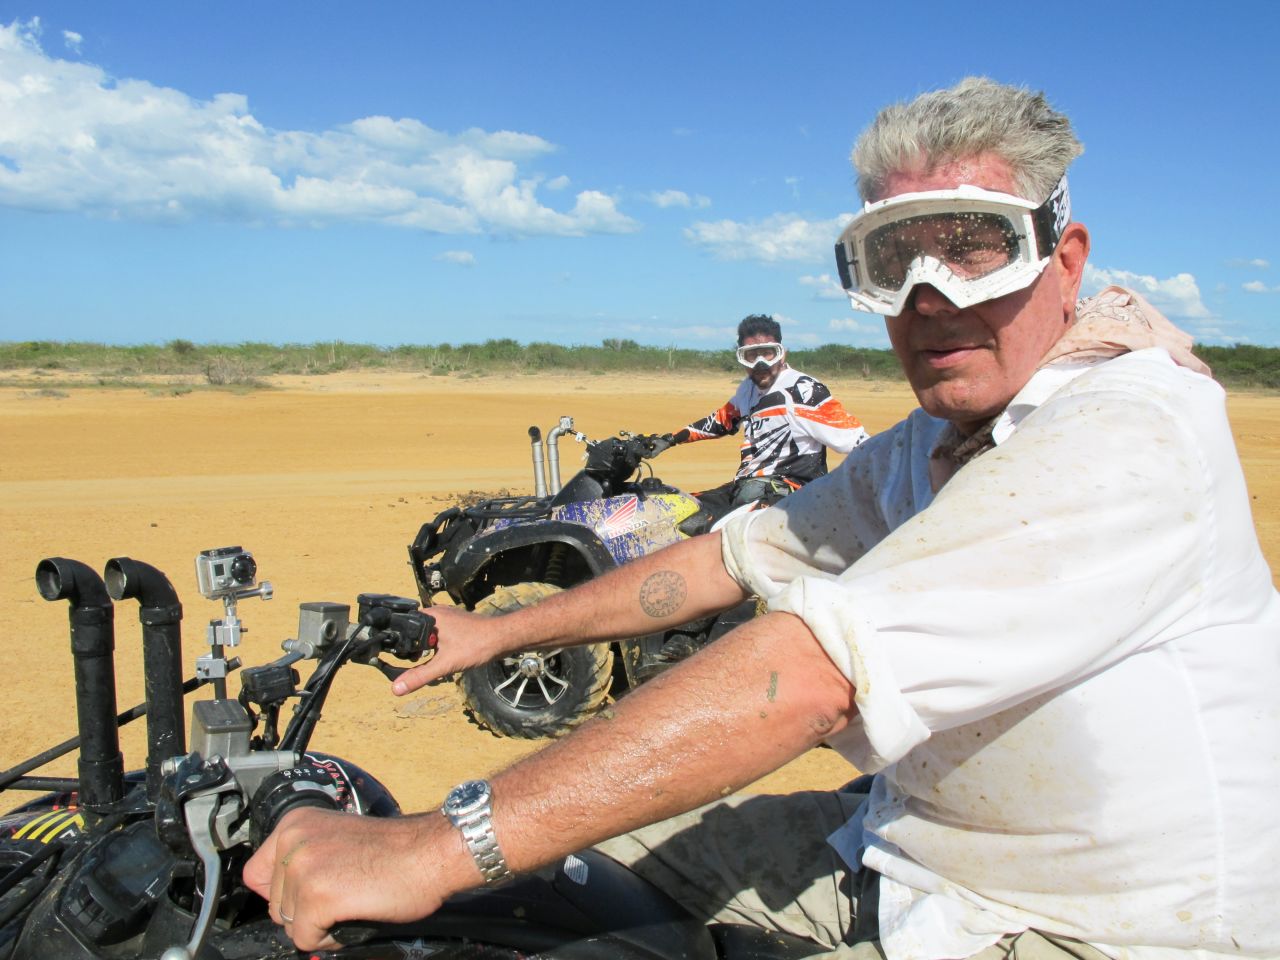 Bourdain rides an all-terrain vehicle in Colombia while filming "Parts Unknown." The CNN show premiered in 2013.